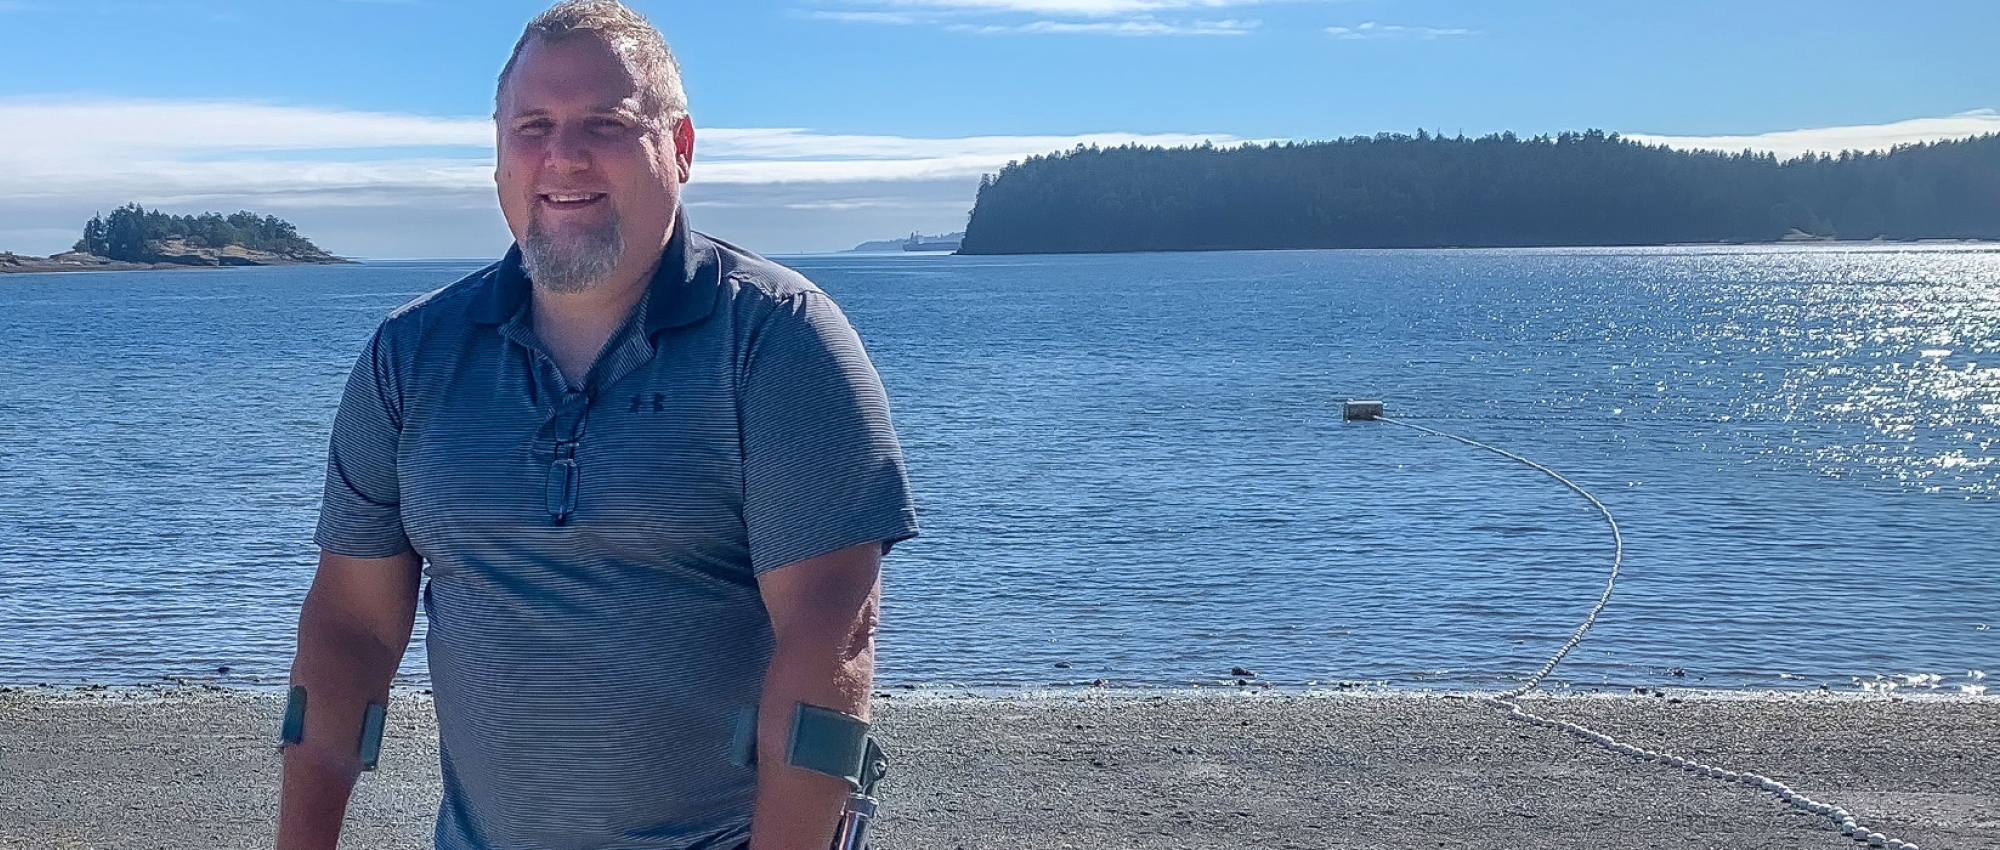 Featured image of blood recipient Nathan Olson from British Columbia standing in front of a beach holding crutches after the motorcycle accident